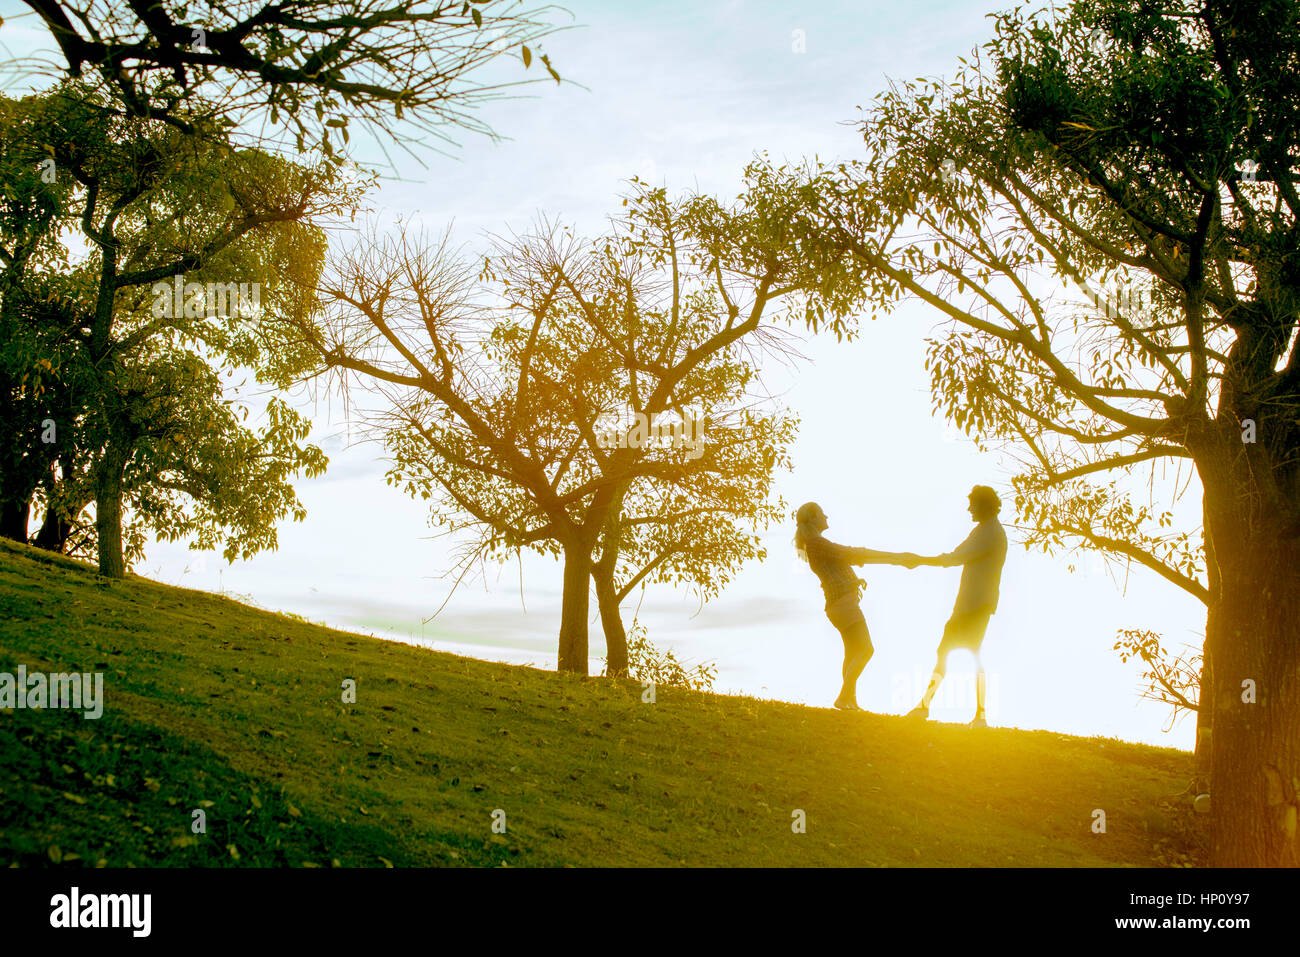 Couple holding hands in park, backlit by sunlight Stock Photo